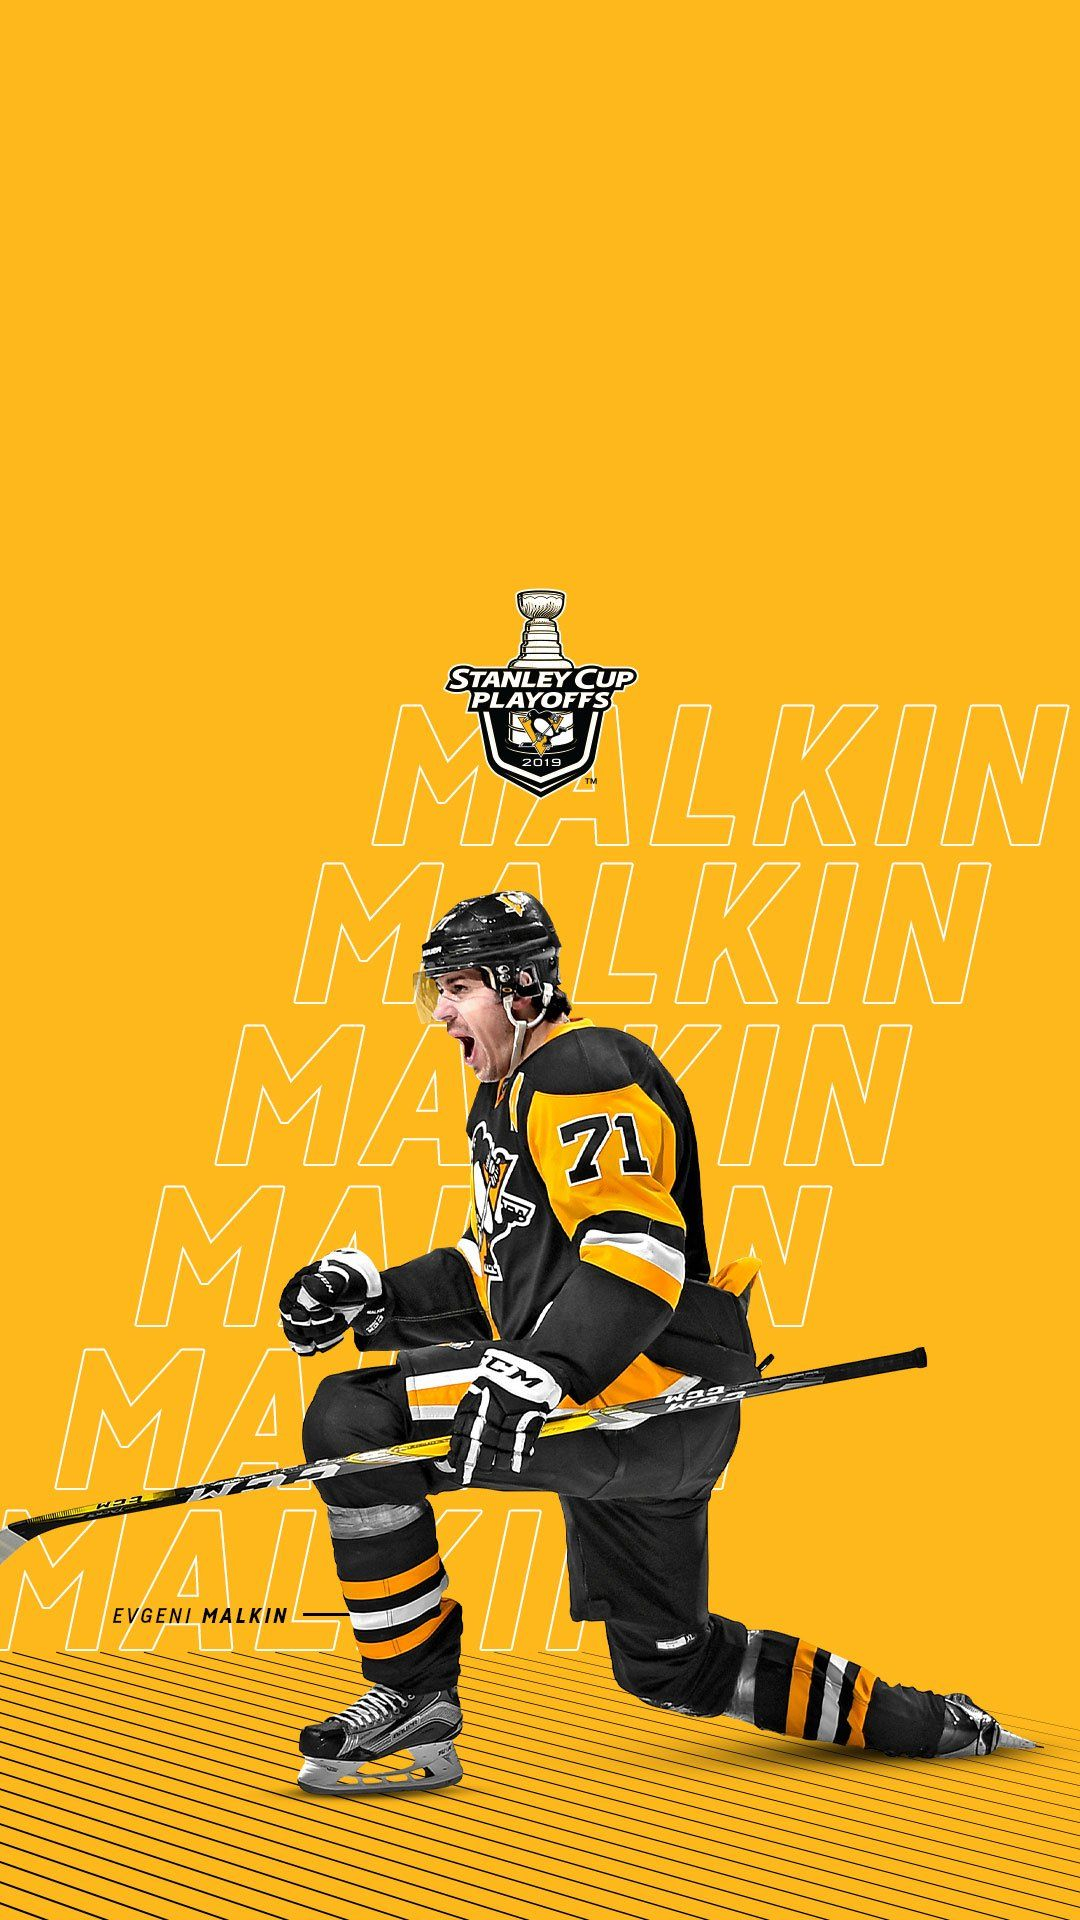 1080x1920 Pittsburgh Penguins on Twitter | Pittsburgh penguins wallpaper, Pittsburgh penguins, Nhl wallpaper